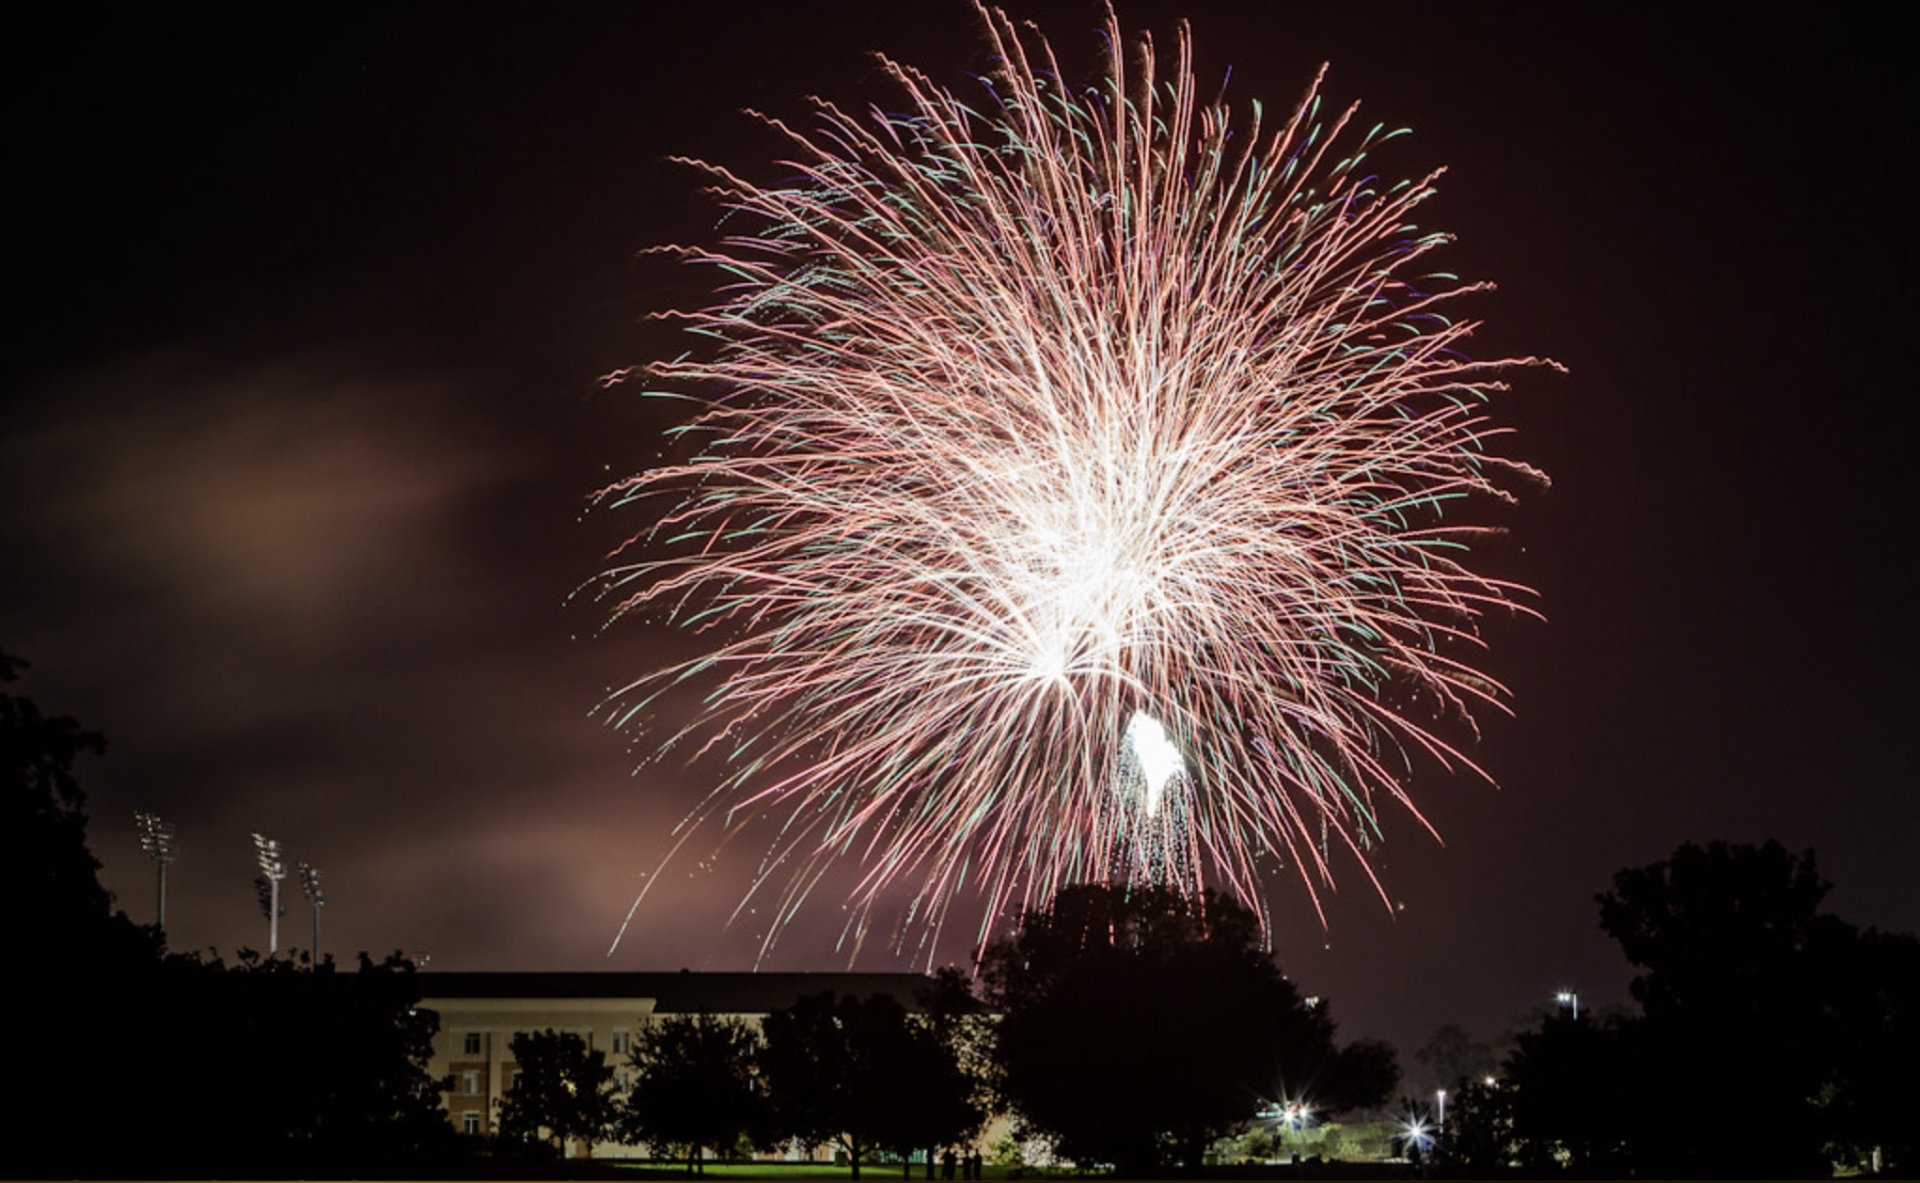 Denton Fireworks Show & 4th of July Events